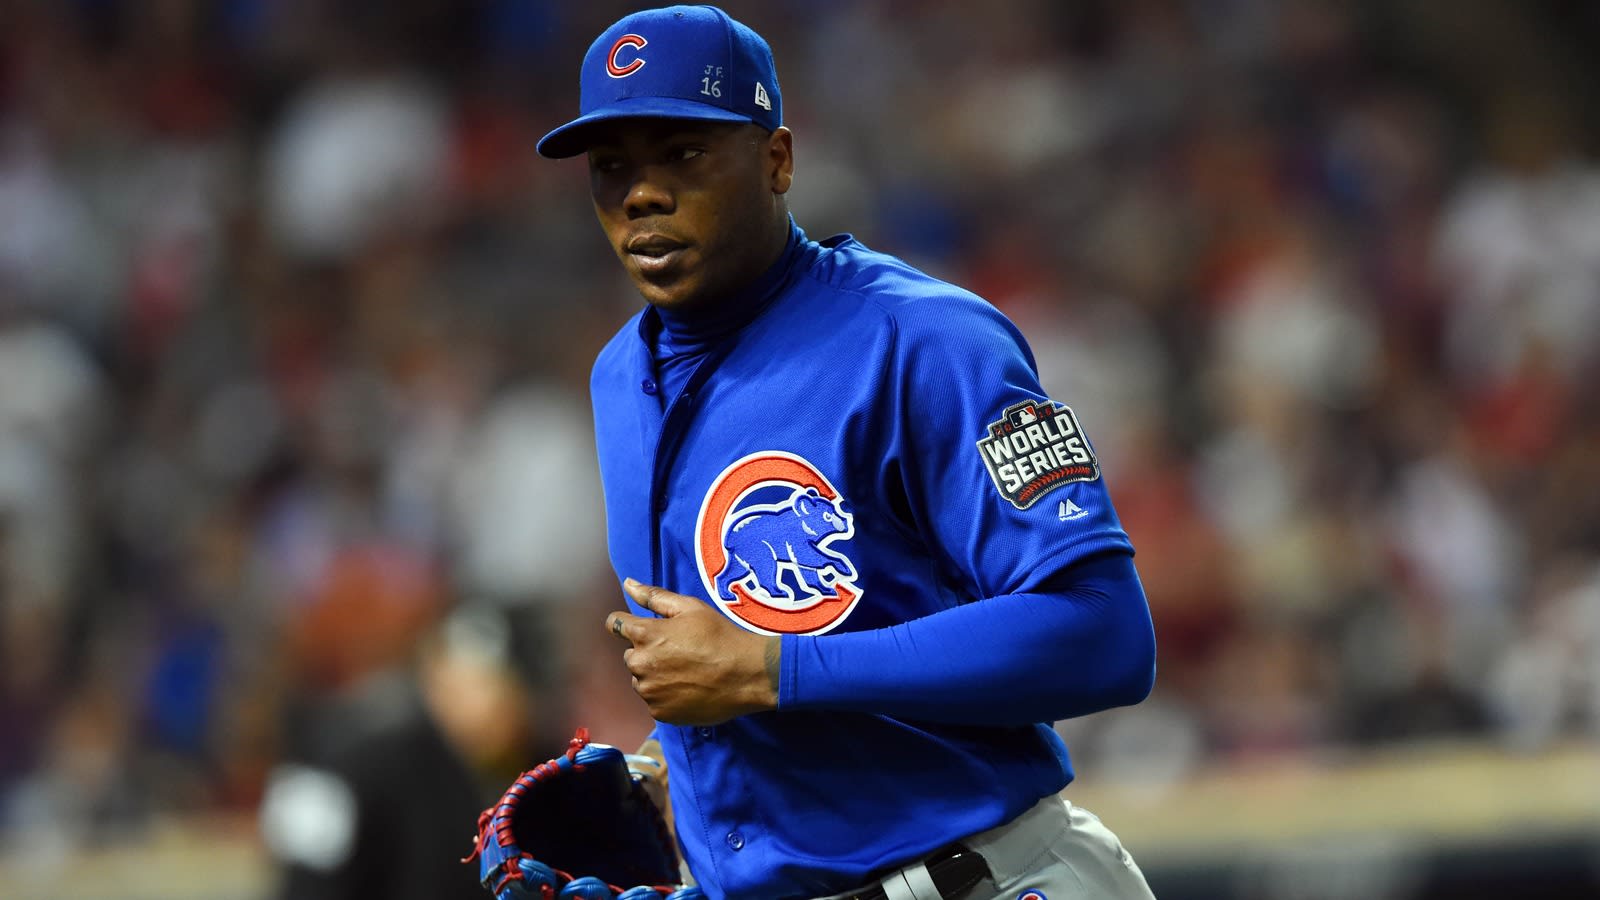 Aroldis Chapman was crying after Game 7 went to rain delay